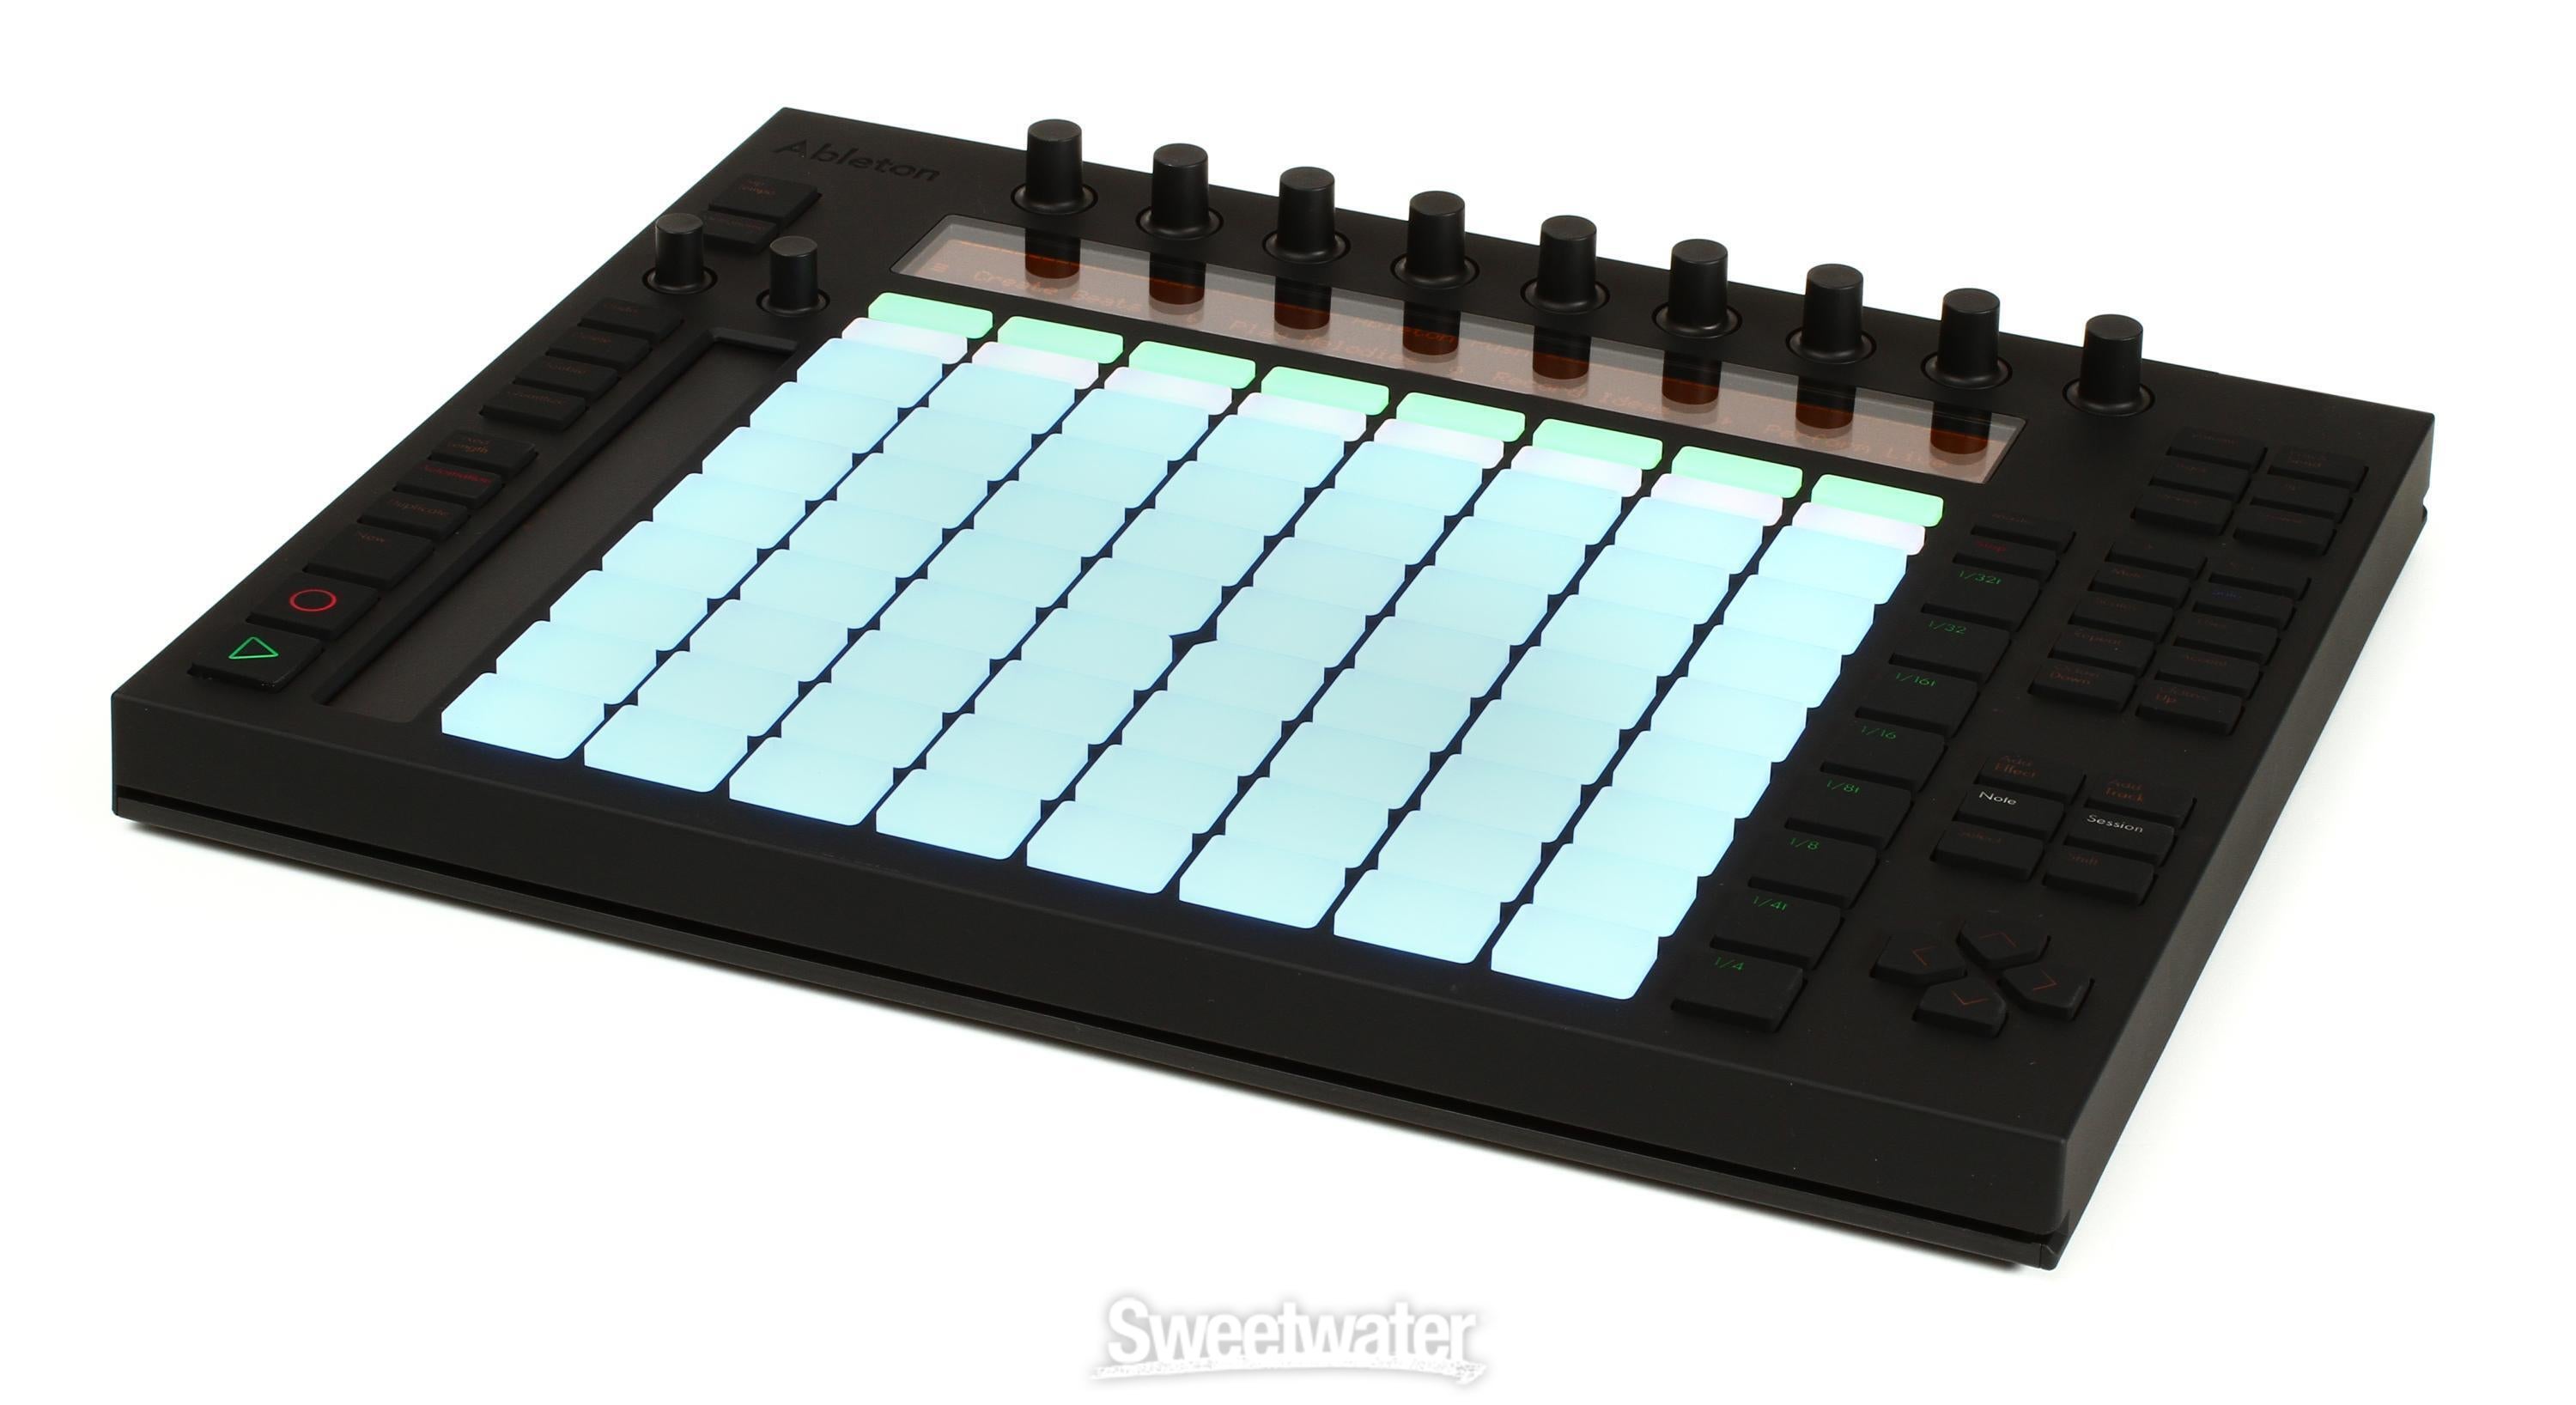 Ableton Push with Live 9 Intro | Sweetwater